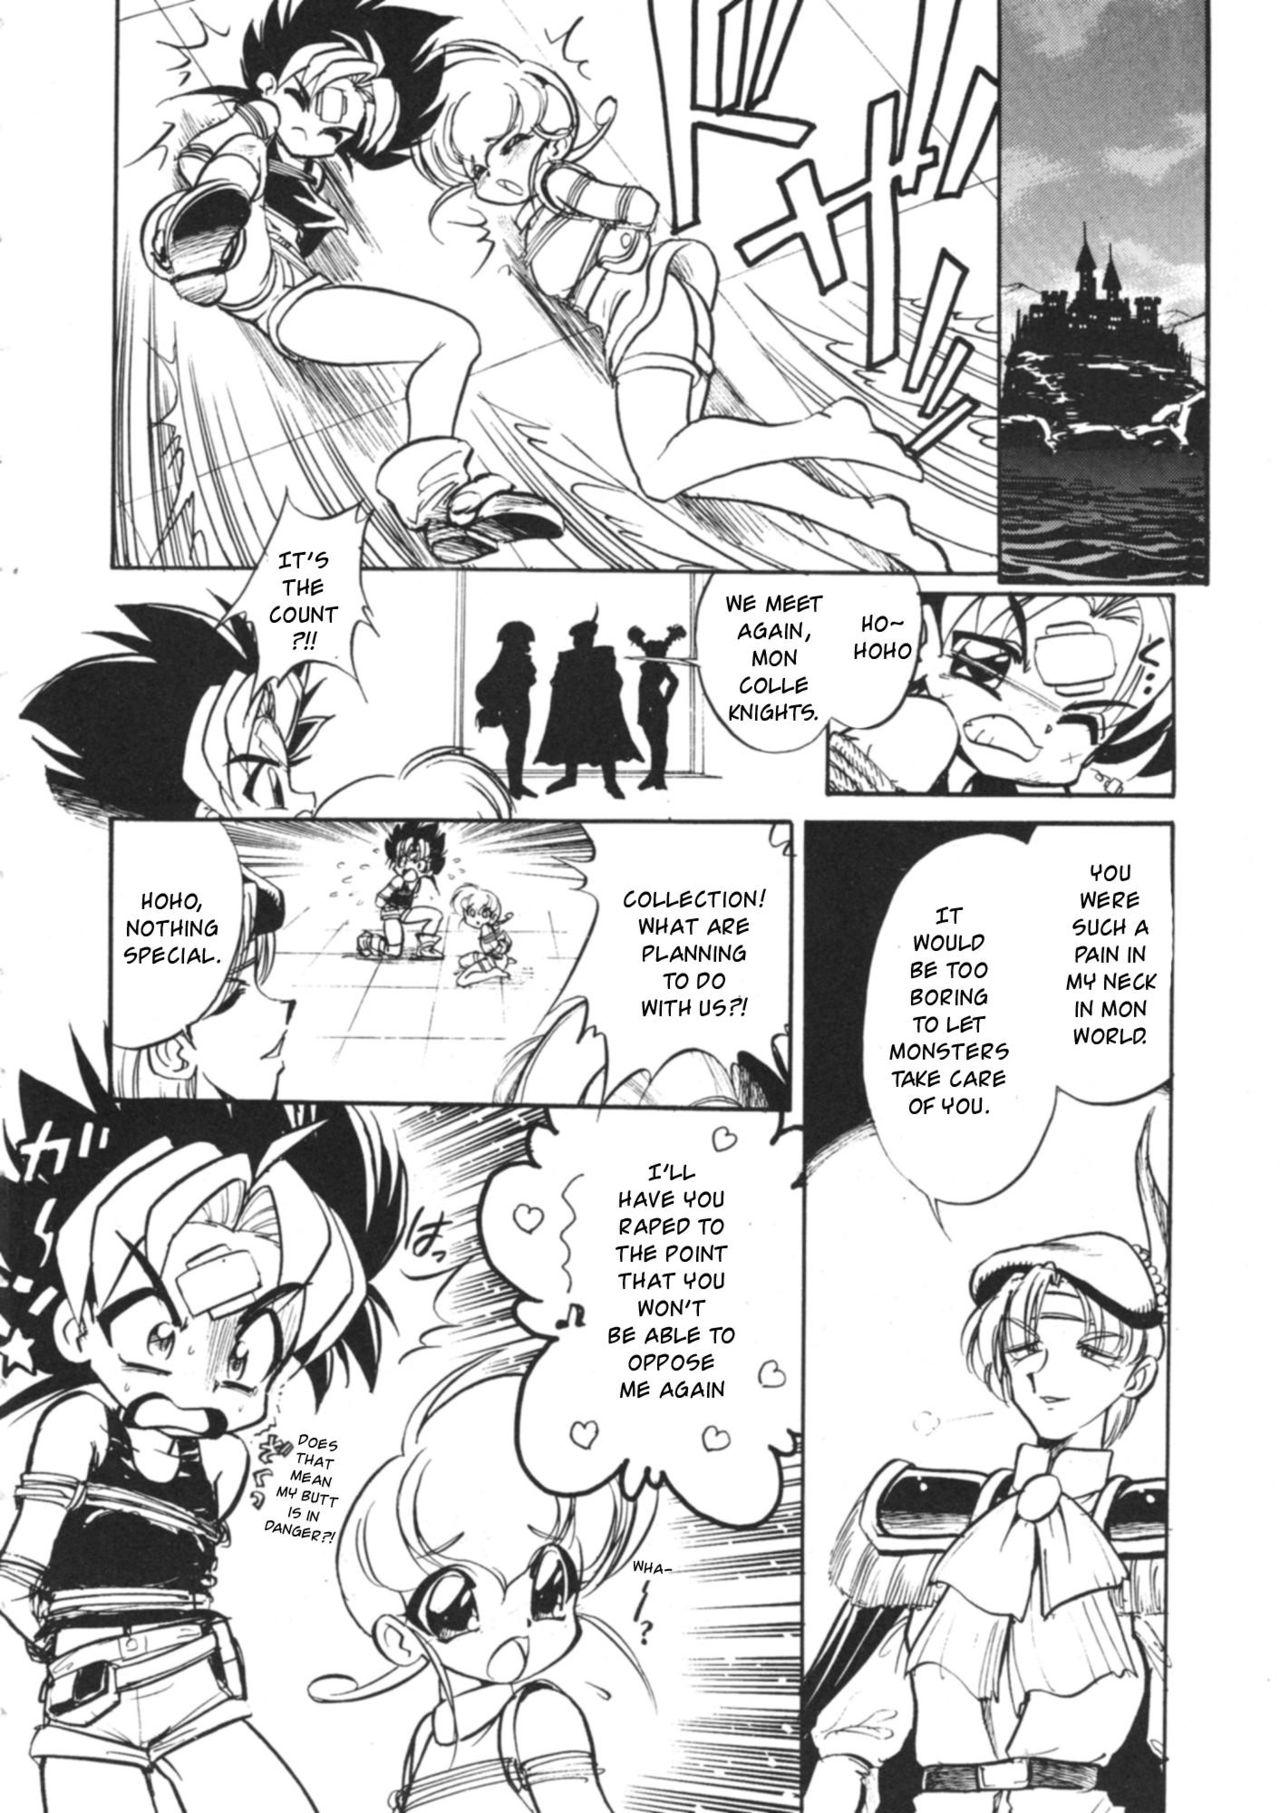 Transexual Kekkou na Otemae - Mon colle knights Adolescente - Page 5